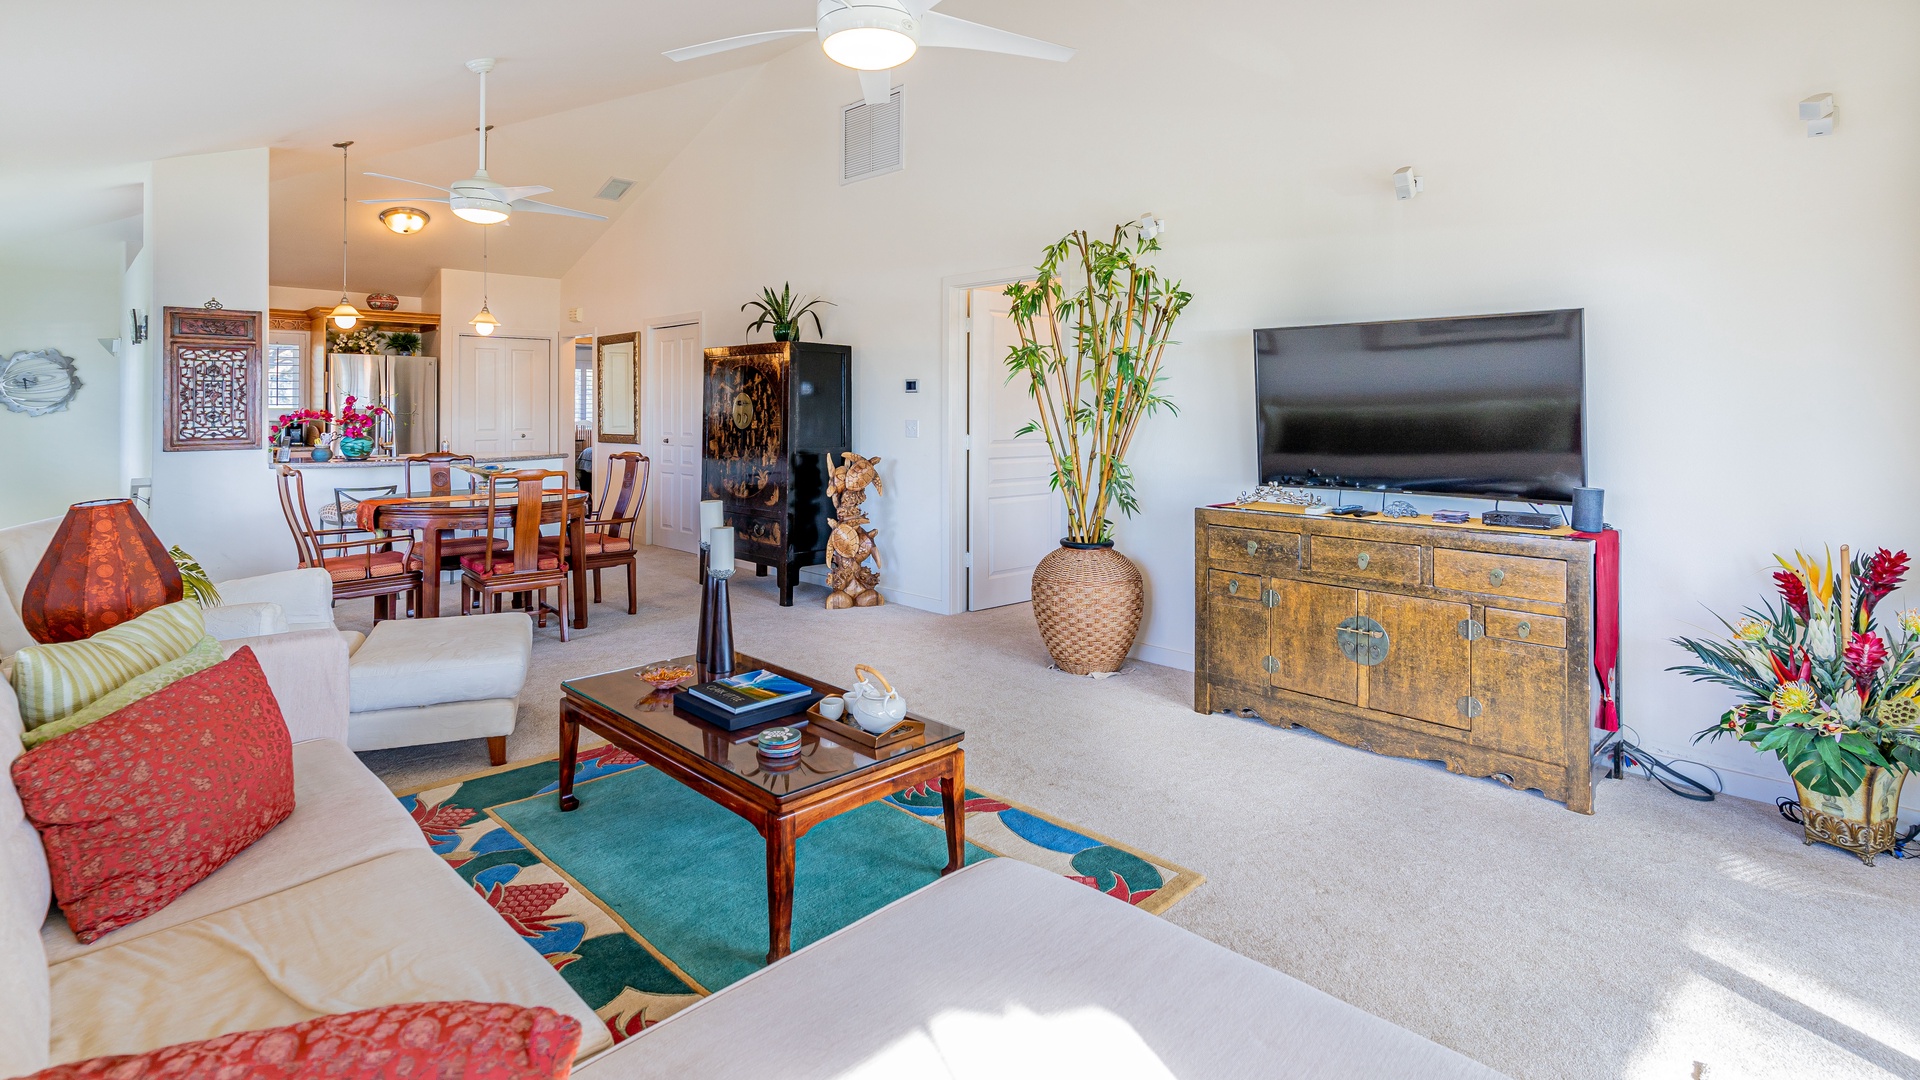 Kapolei Vacation Rentals, Kai Lani 16C - Relax with a book or movie night on the television.